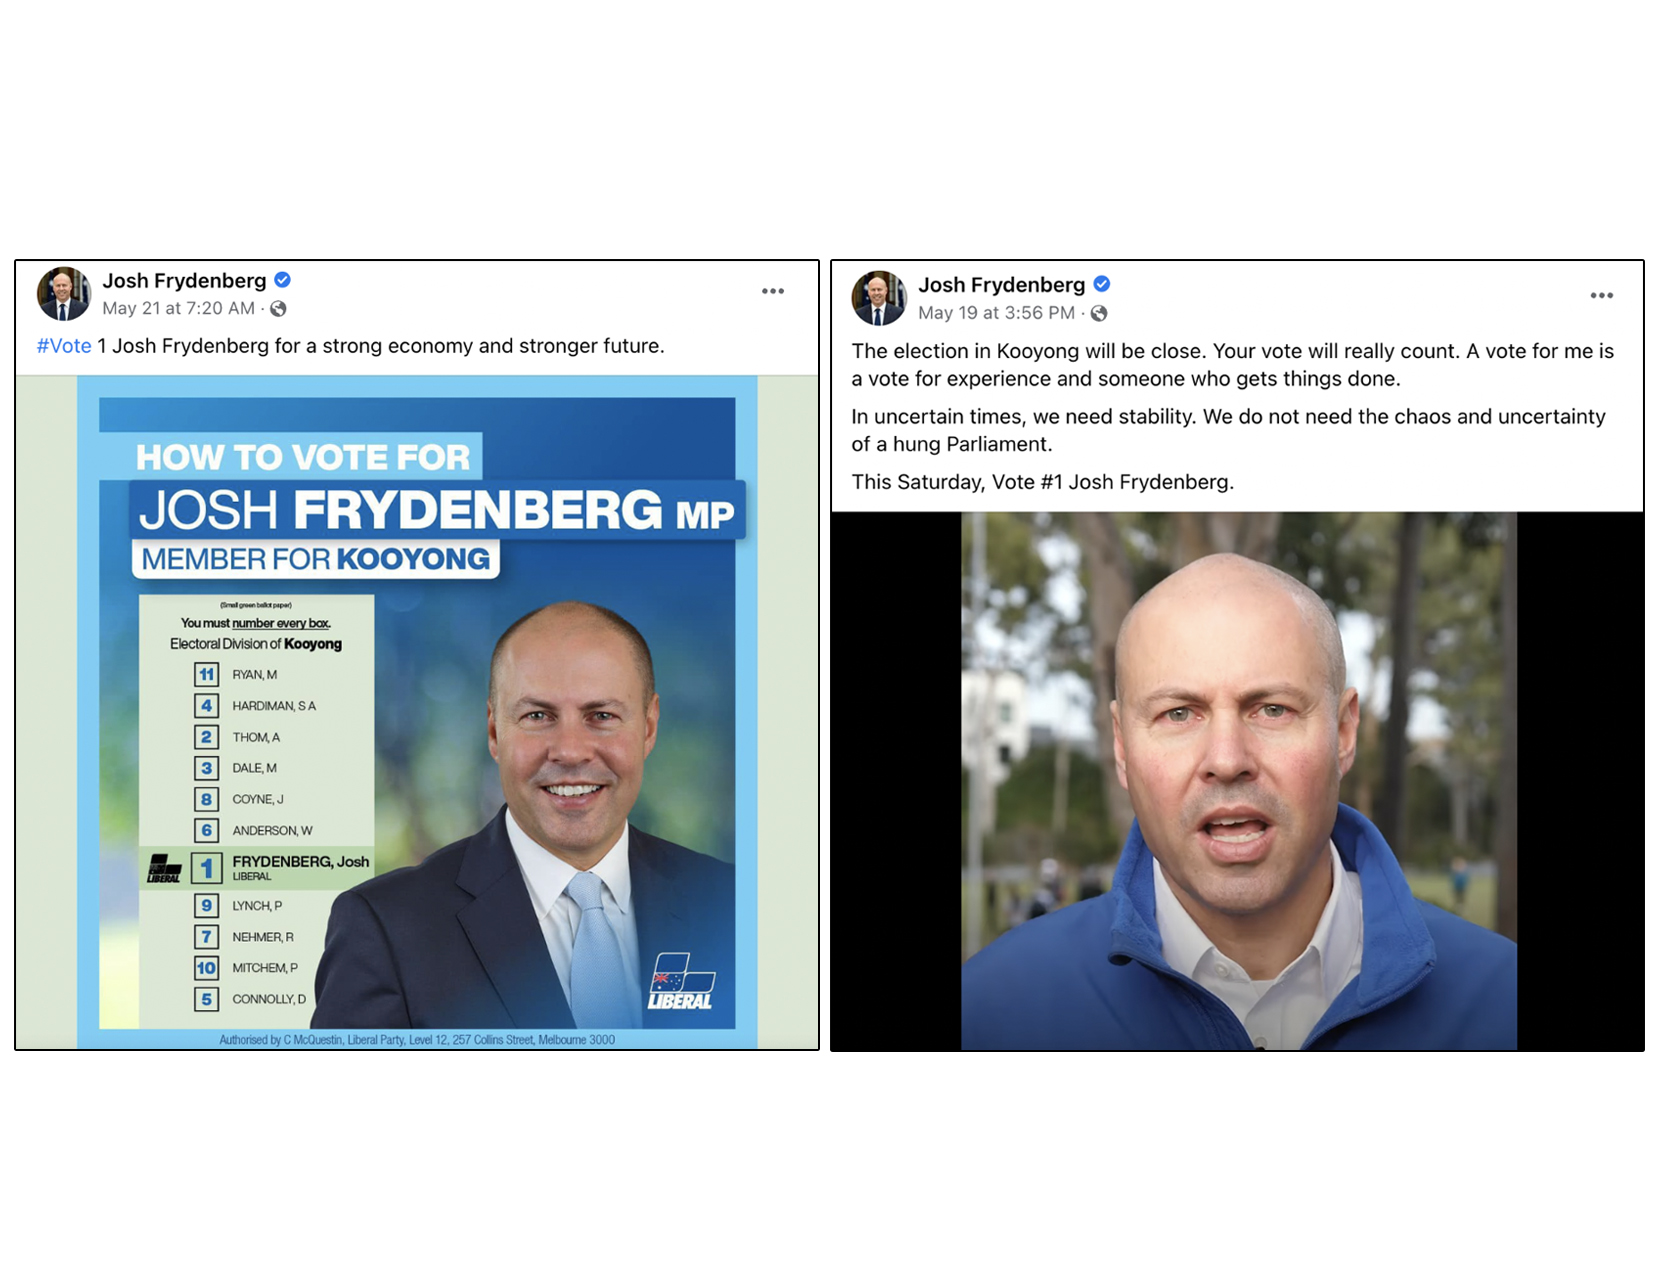 Two screenshots of Facebook by Josh Frydenberg and featuring photos of him.